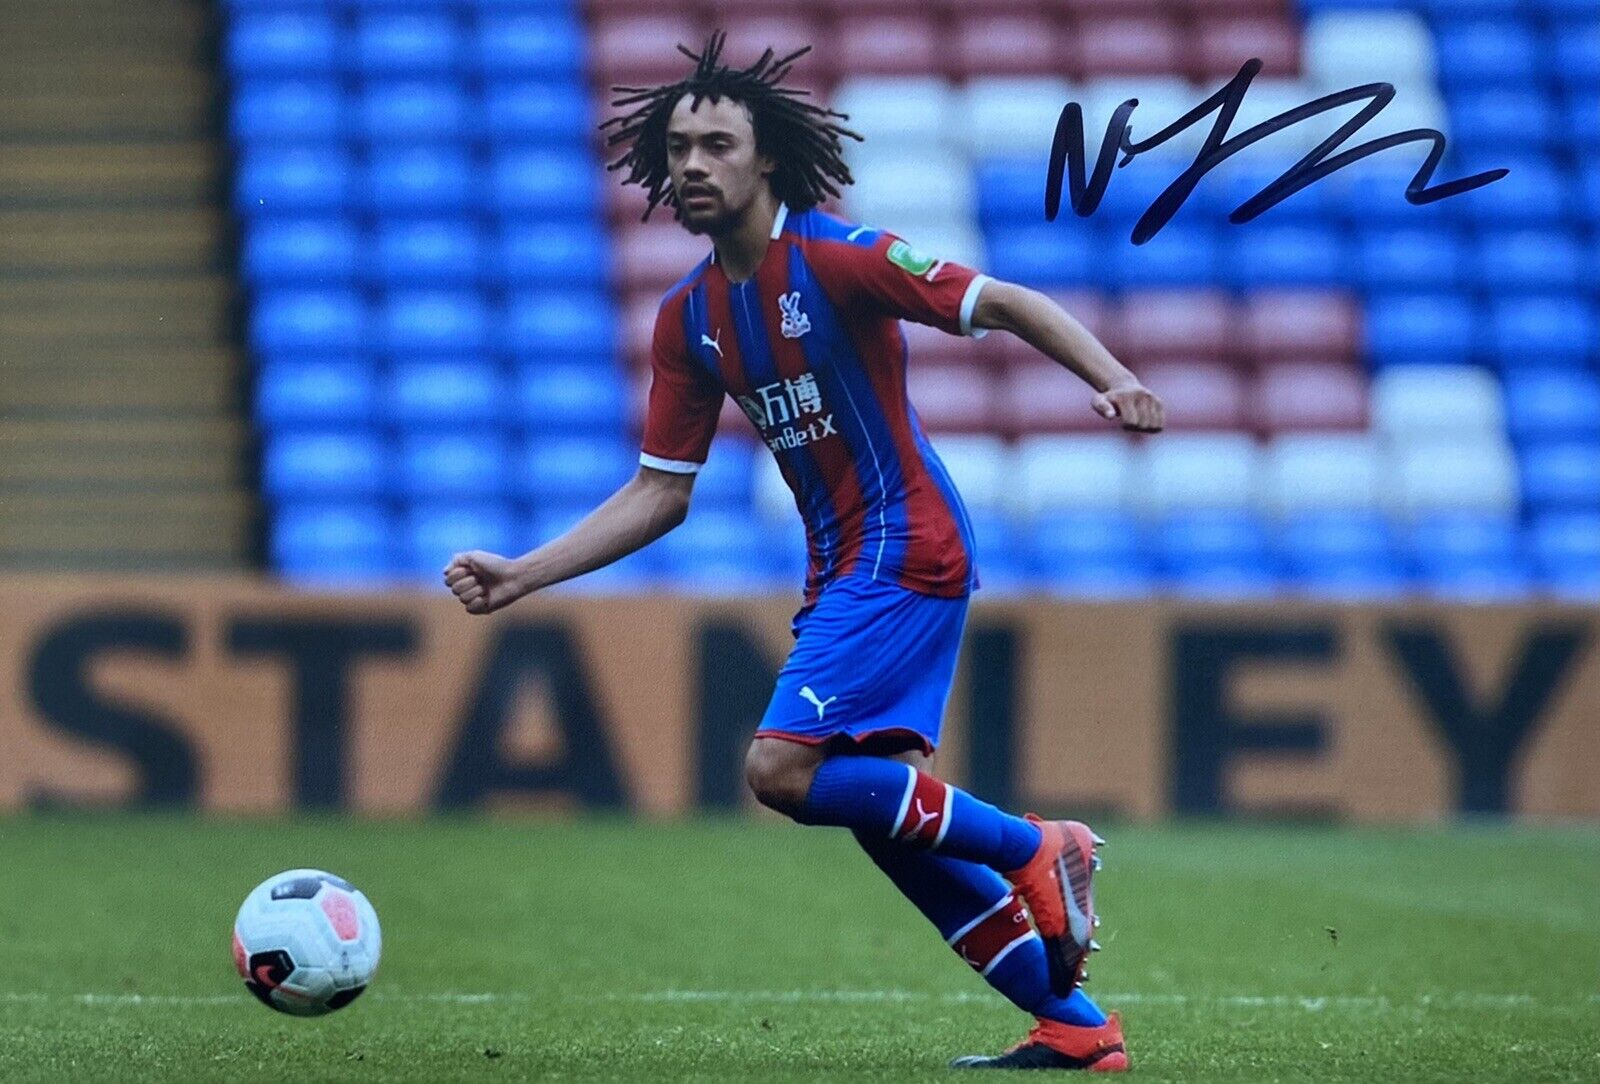 Nya Kirby Genuine Hand Signed Crystal Palace 6X4 Photo Poster painting 2